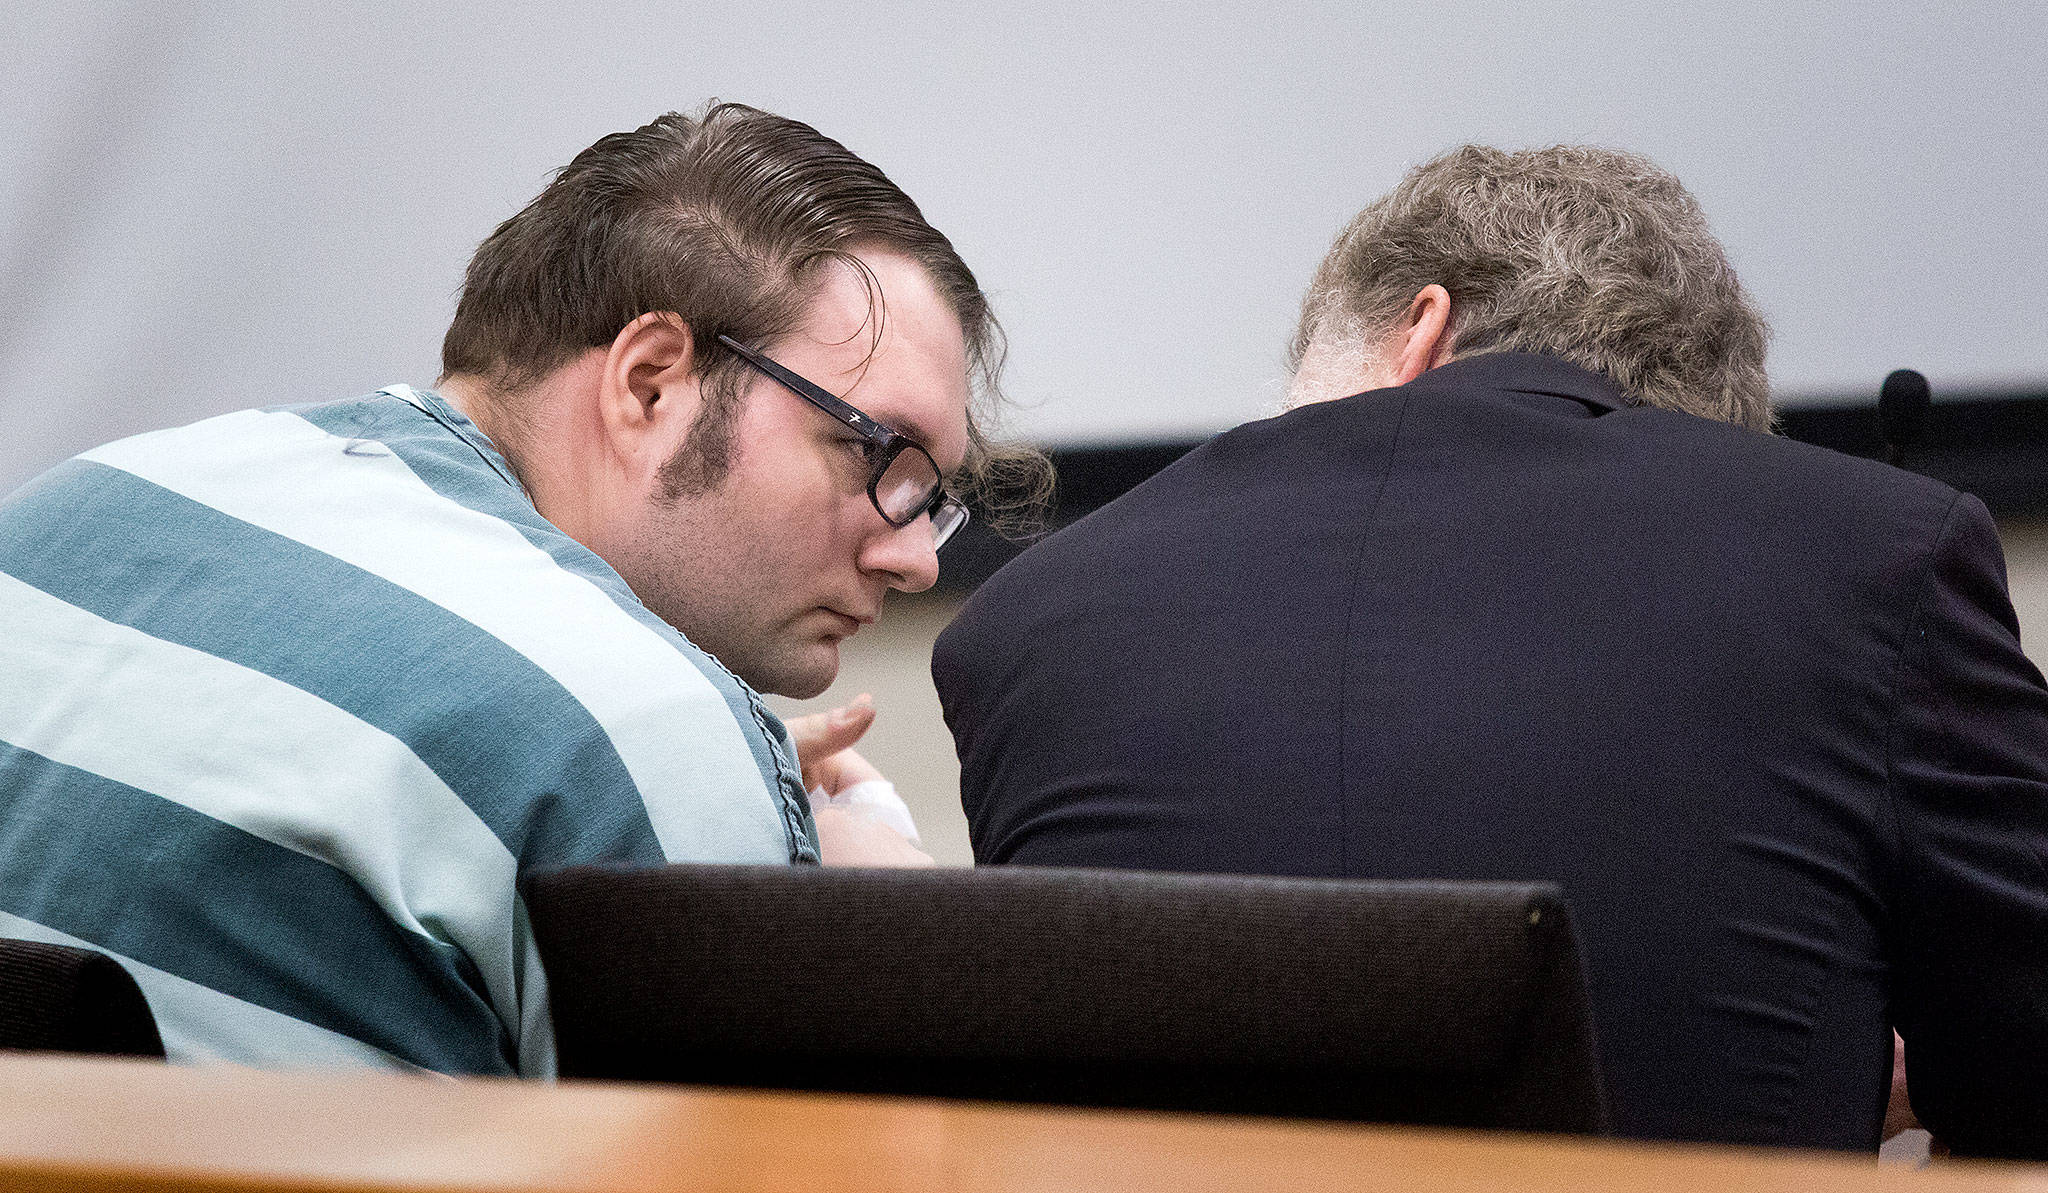 Dakota Reed consults with his attorney before he is sentenced to a year in jail at Snohomish County Courthouse on Tuesday in Everett. Reed had pleaded guilty in May to two counts of threats to bomb or injure property and spewing violent speech on fake Facebook pages for months. (Andy Bronson / The Herald)